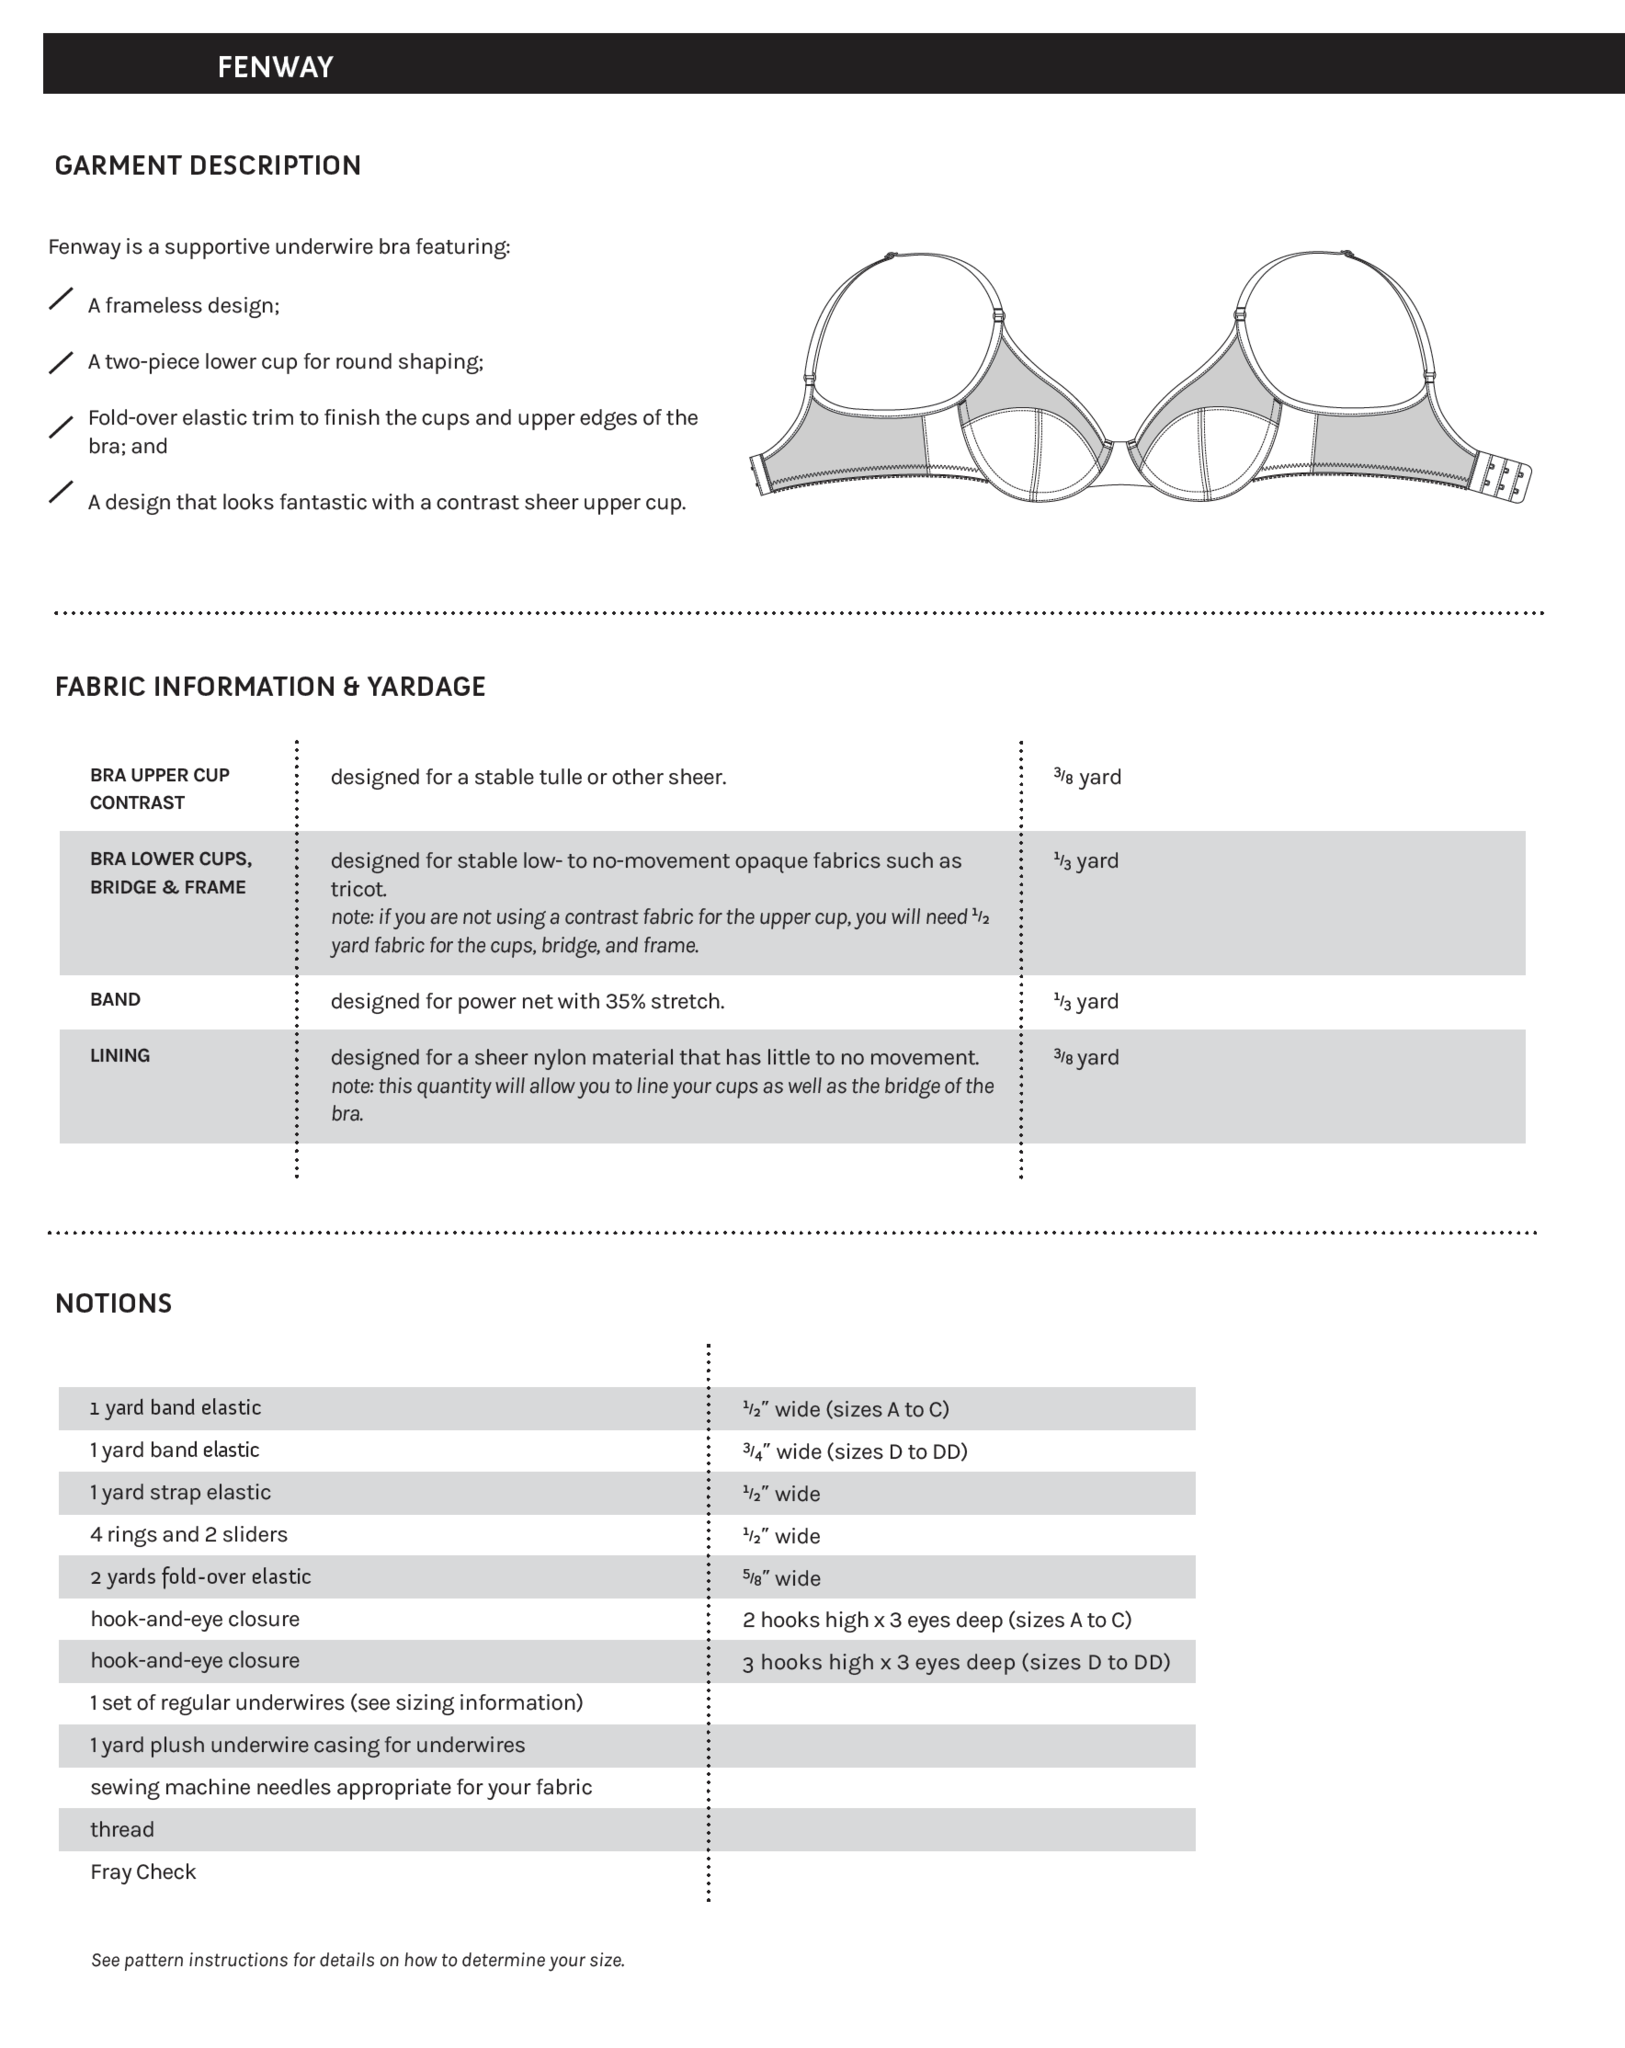 Find your proper bra cup and band size in inches with this printable sizing  guide. Free to download and print